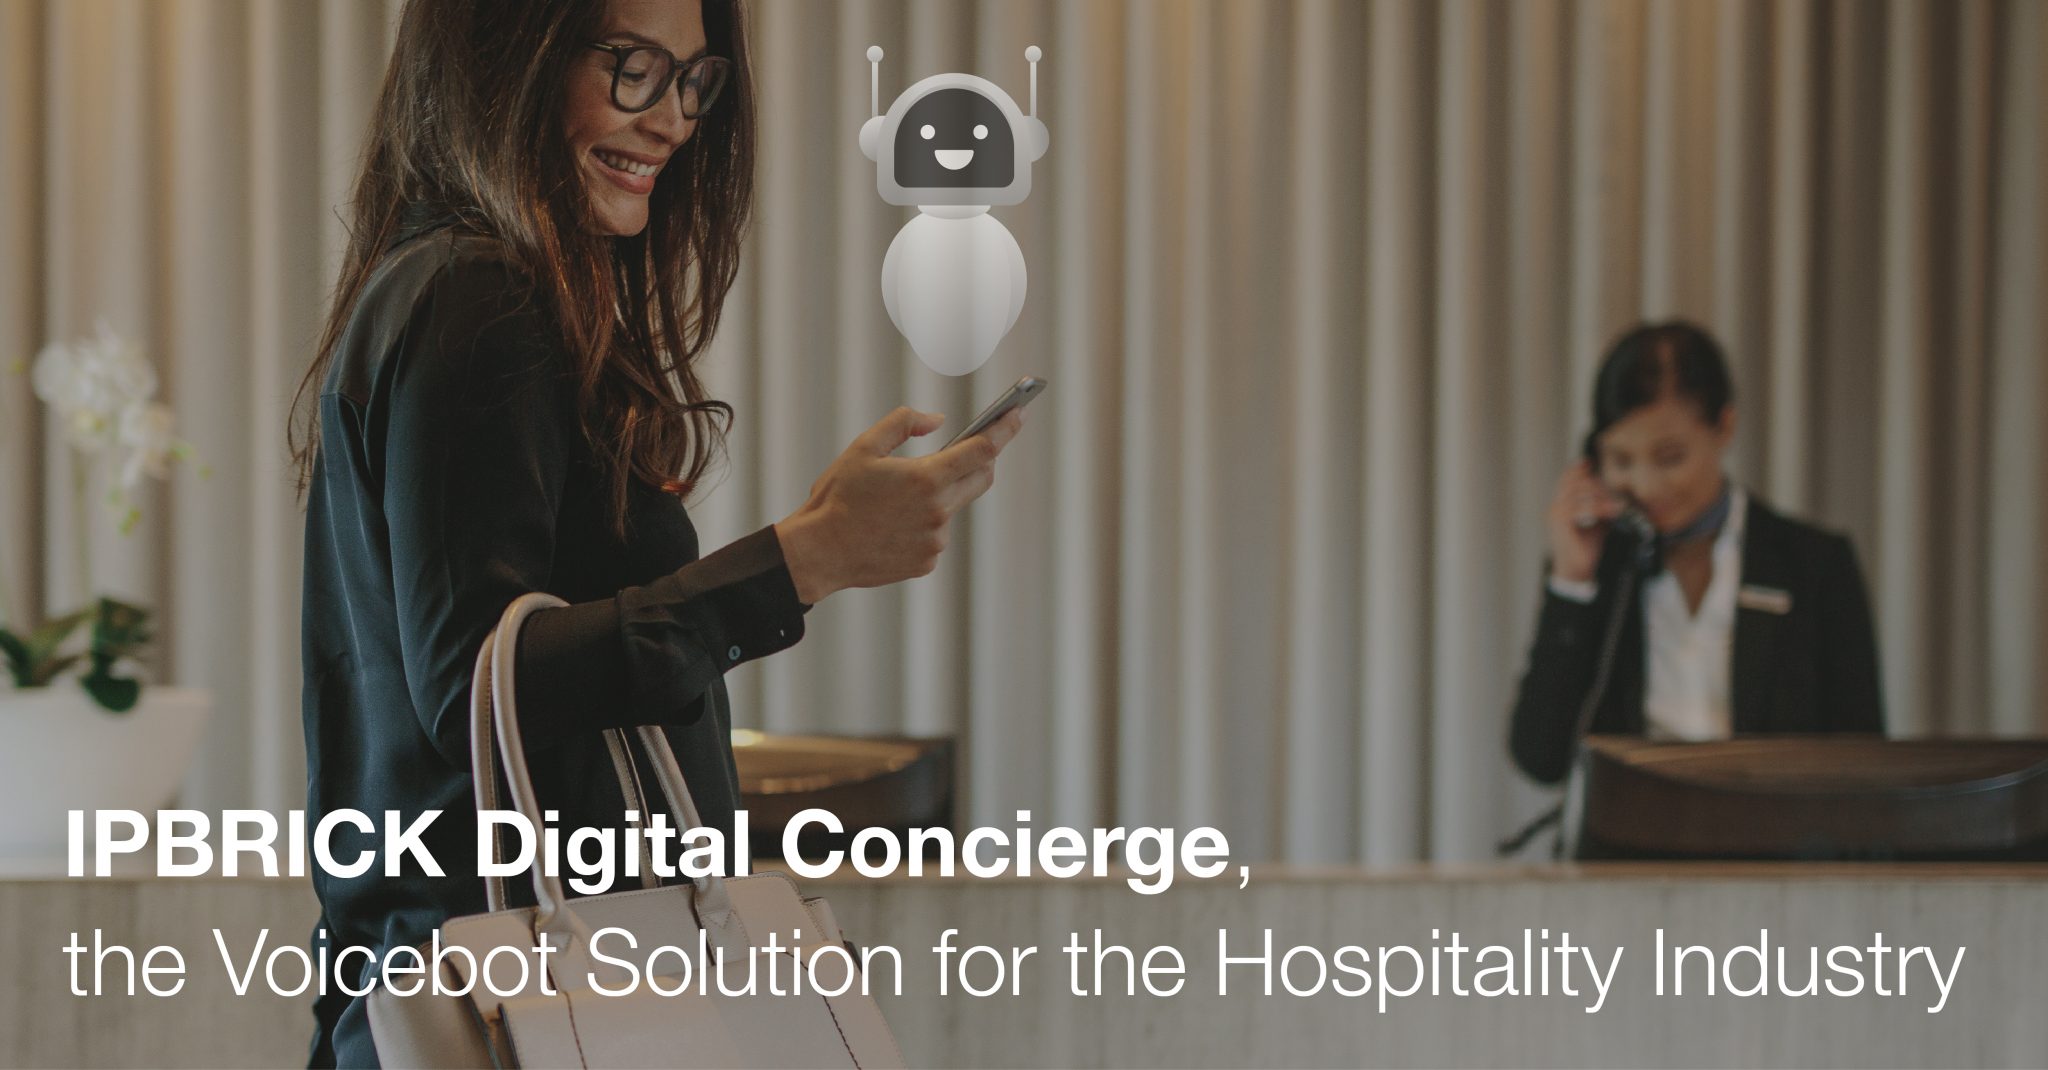 Ipbrick Digital Concierge The Voicebot Solution For The Hospitality Industry Ipbrick